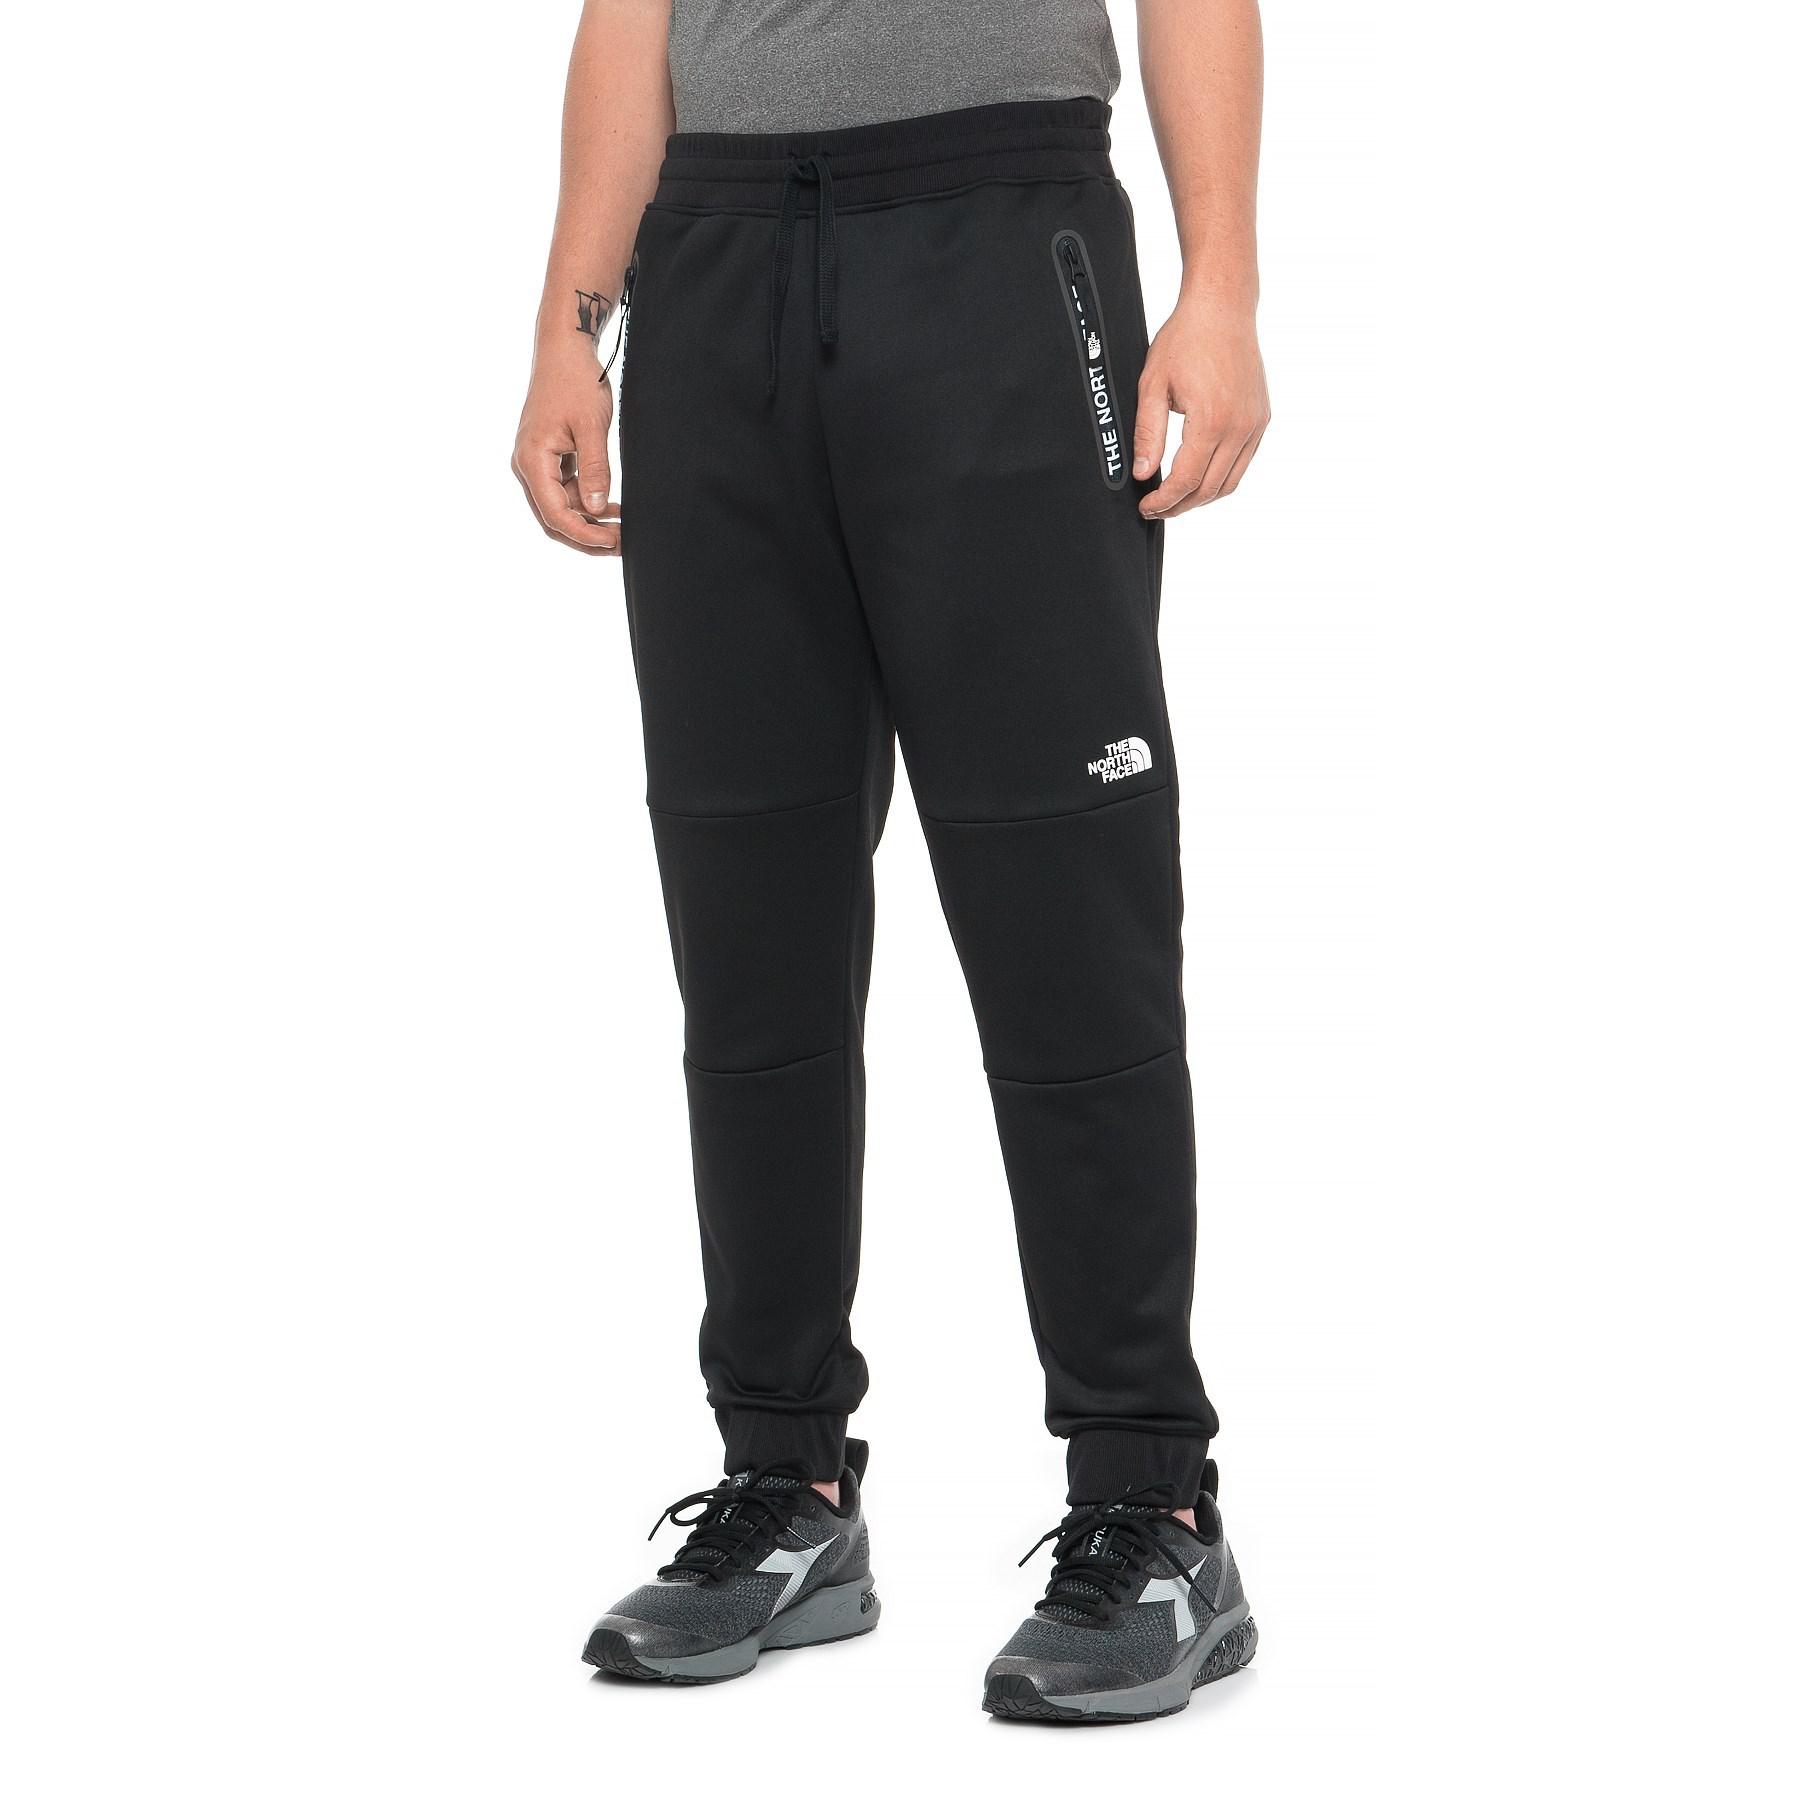 north face joggers cheap